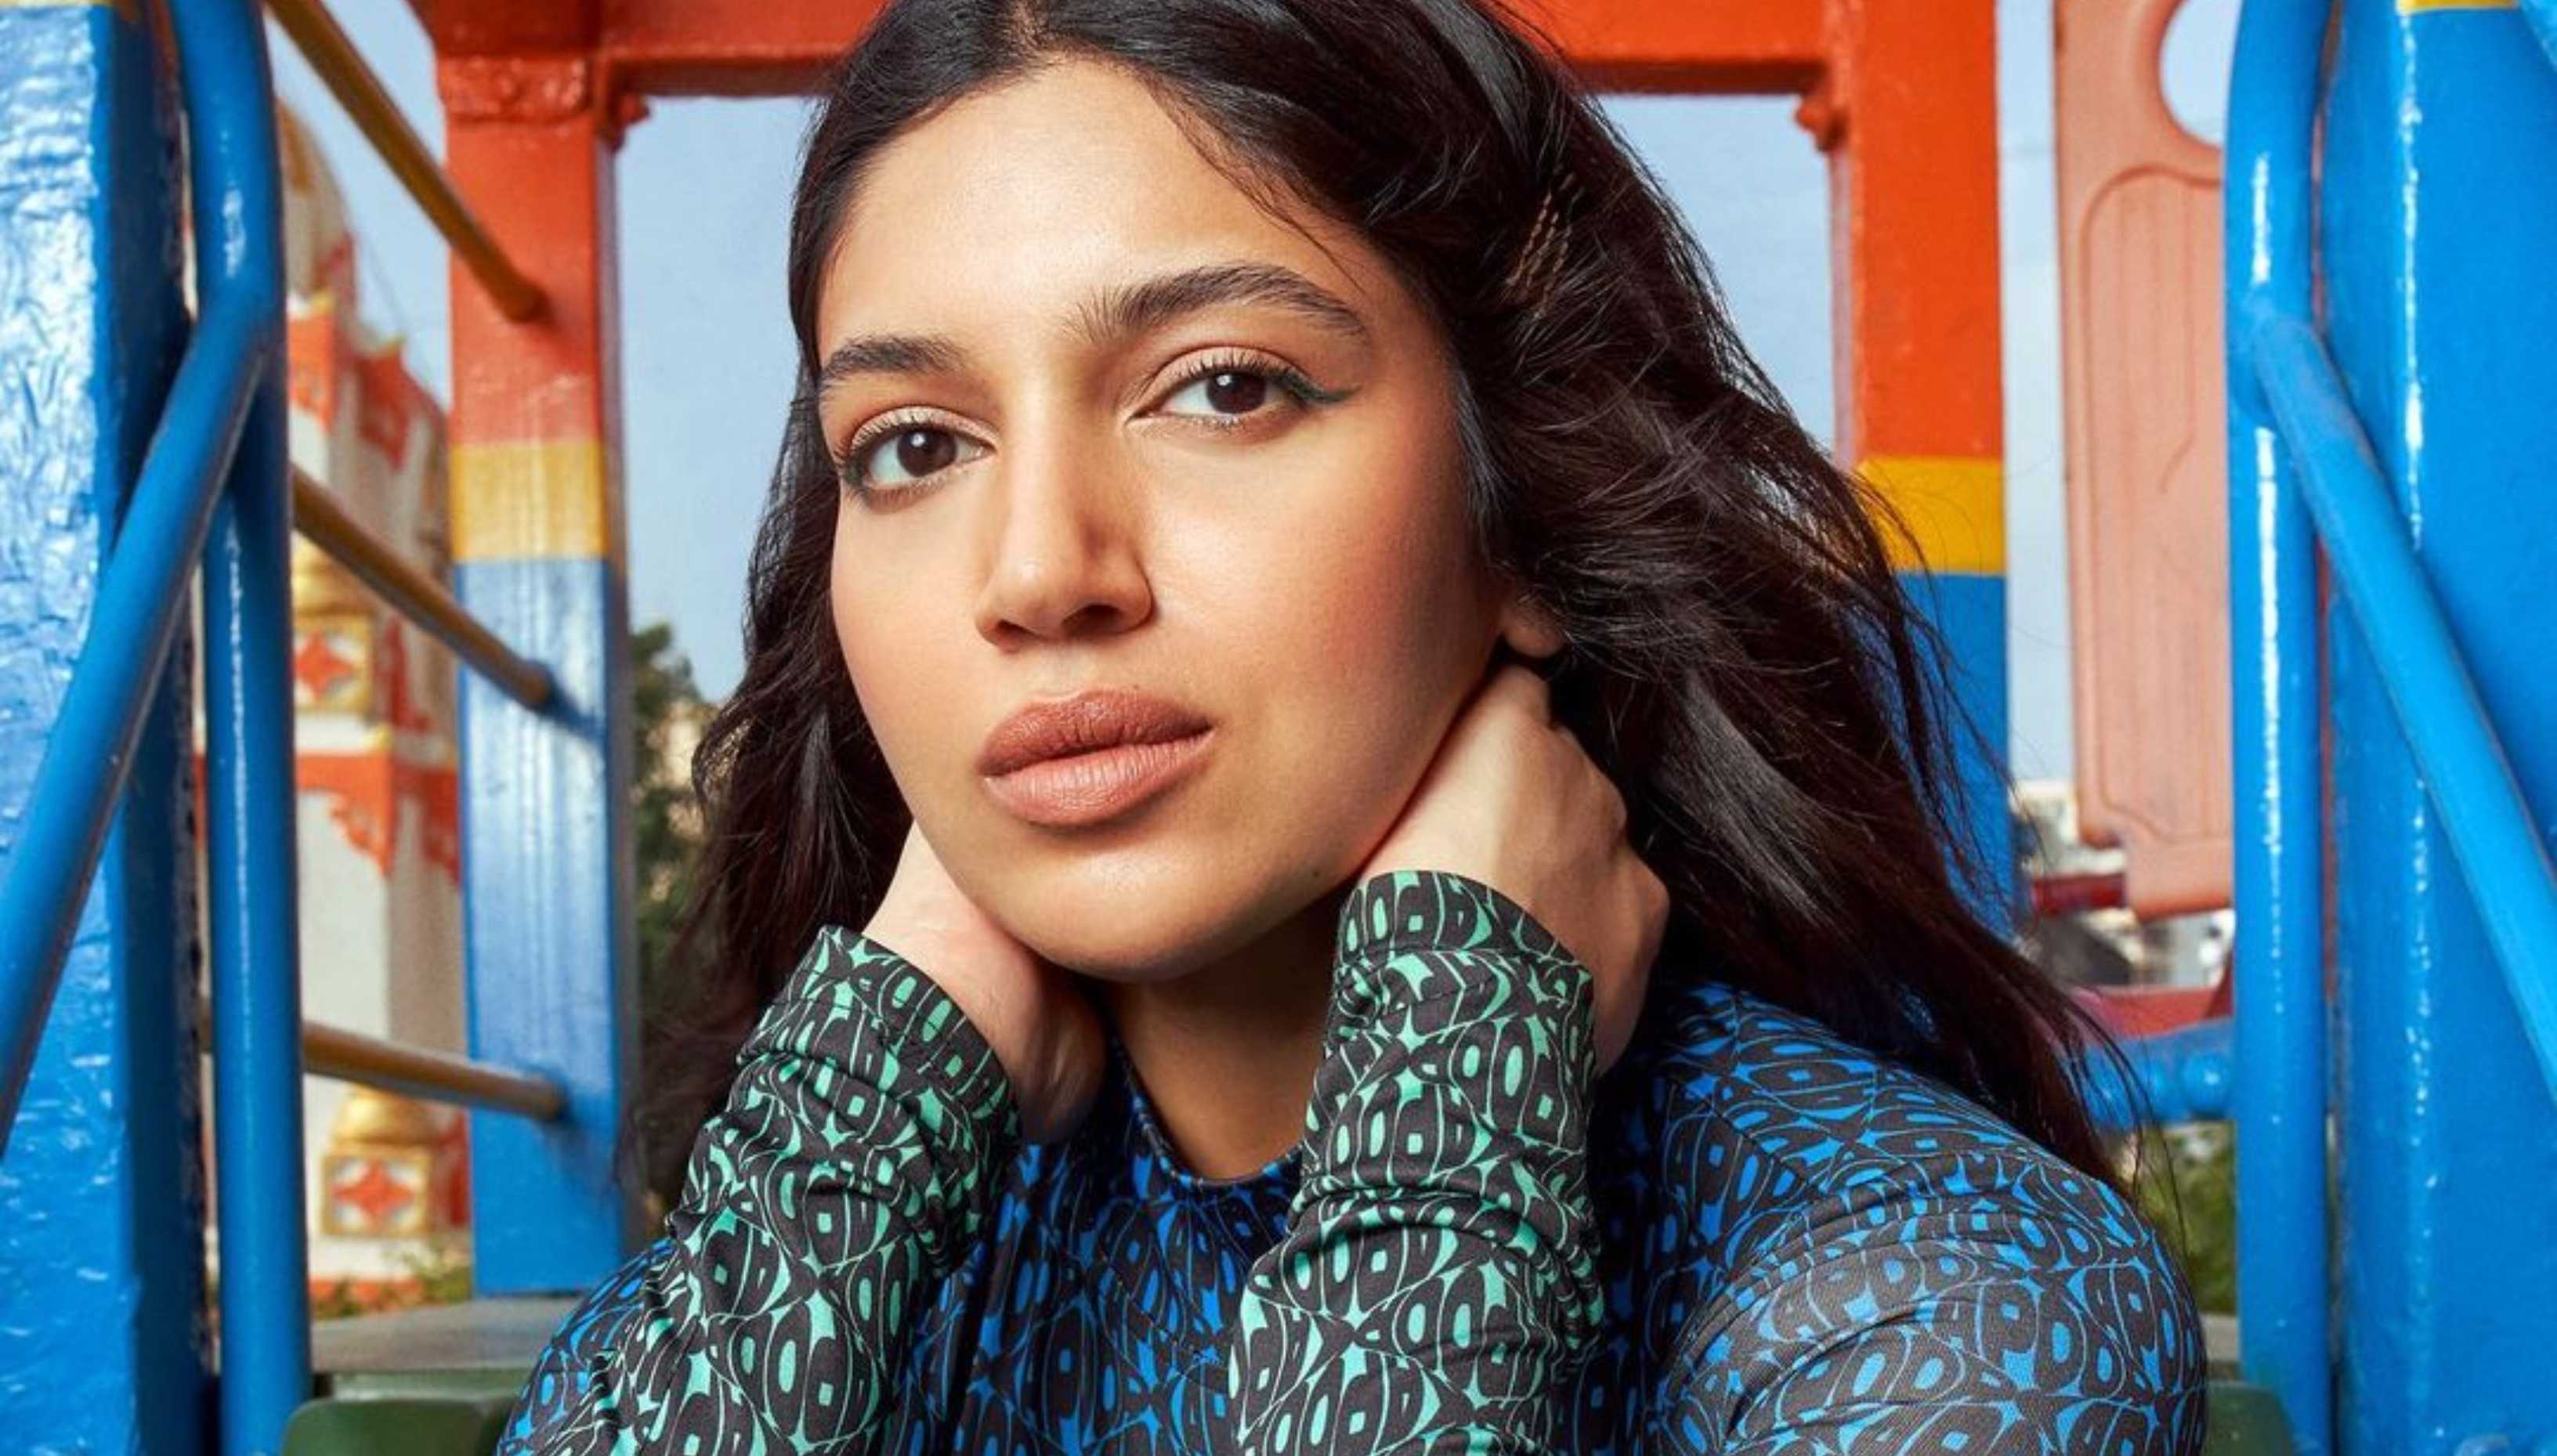 Bhumi Pednekar appeals to world leaders, calls for youth to unite: ‘Together we can create a healthy planet’